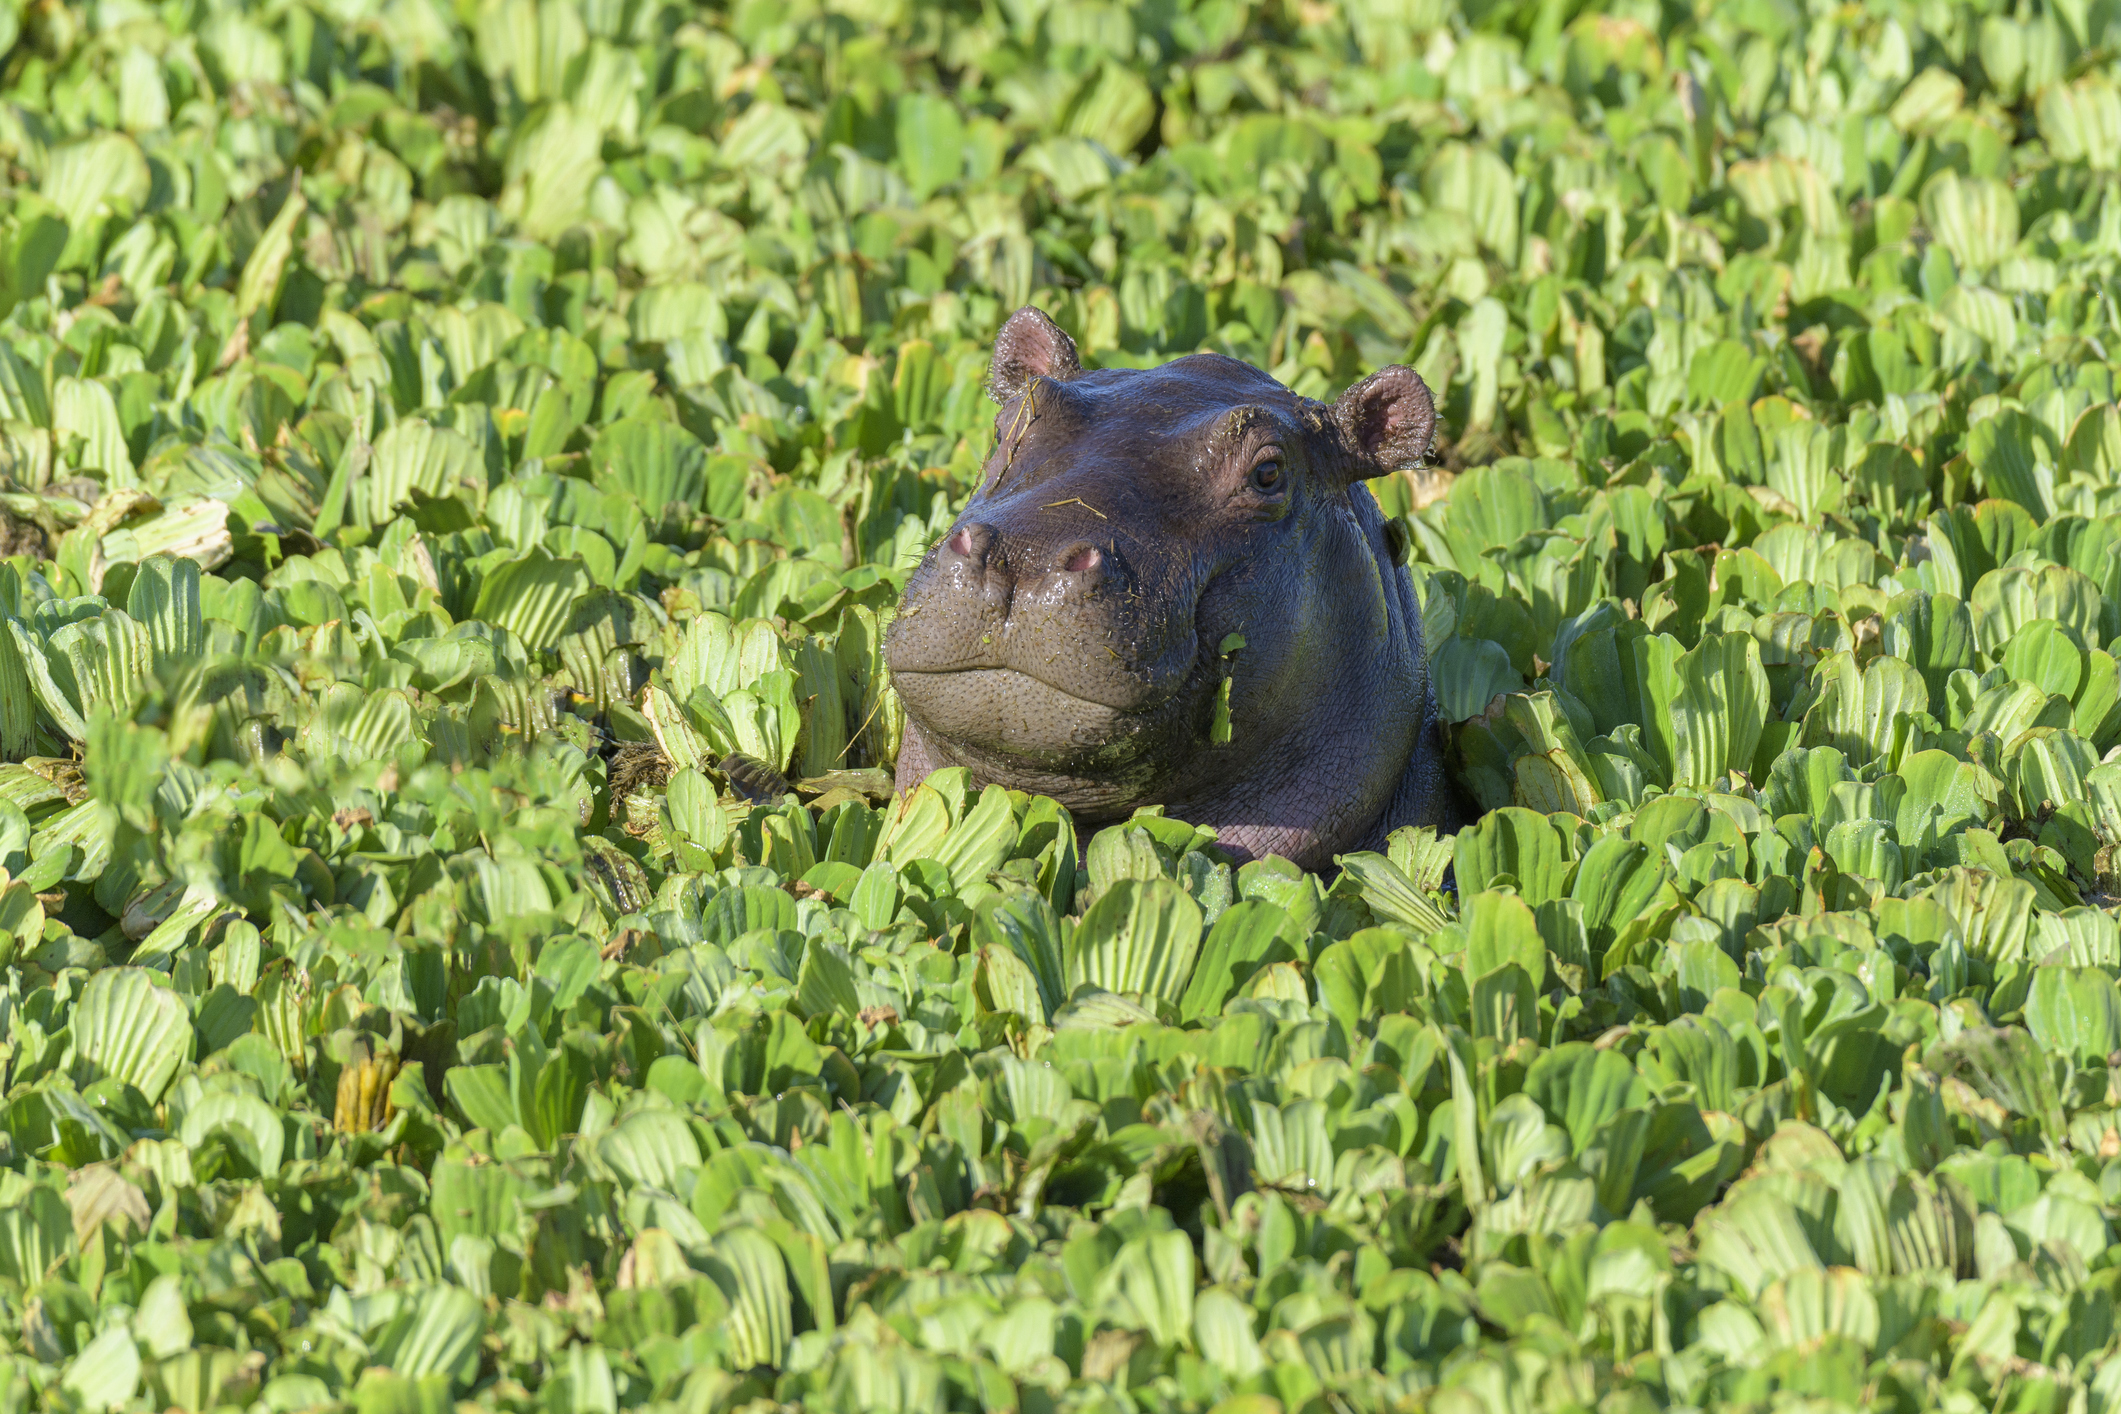 Hippo partially submerged in water surrounded by green vegetation